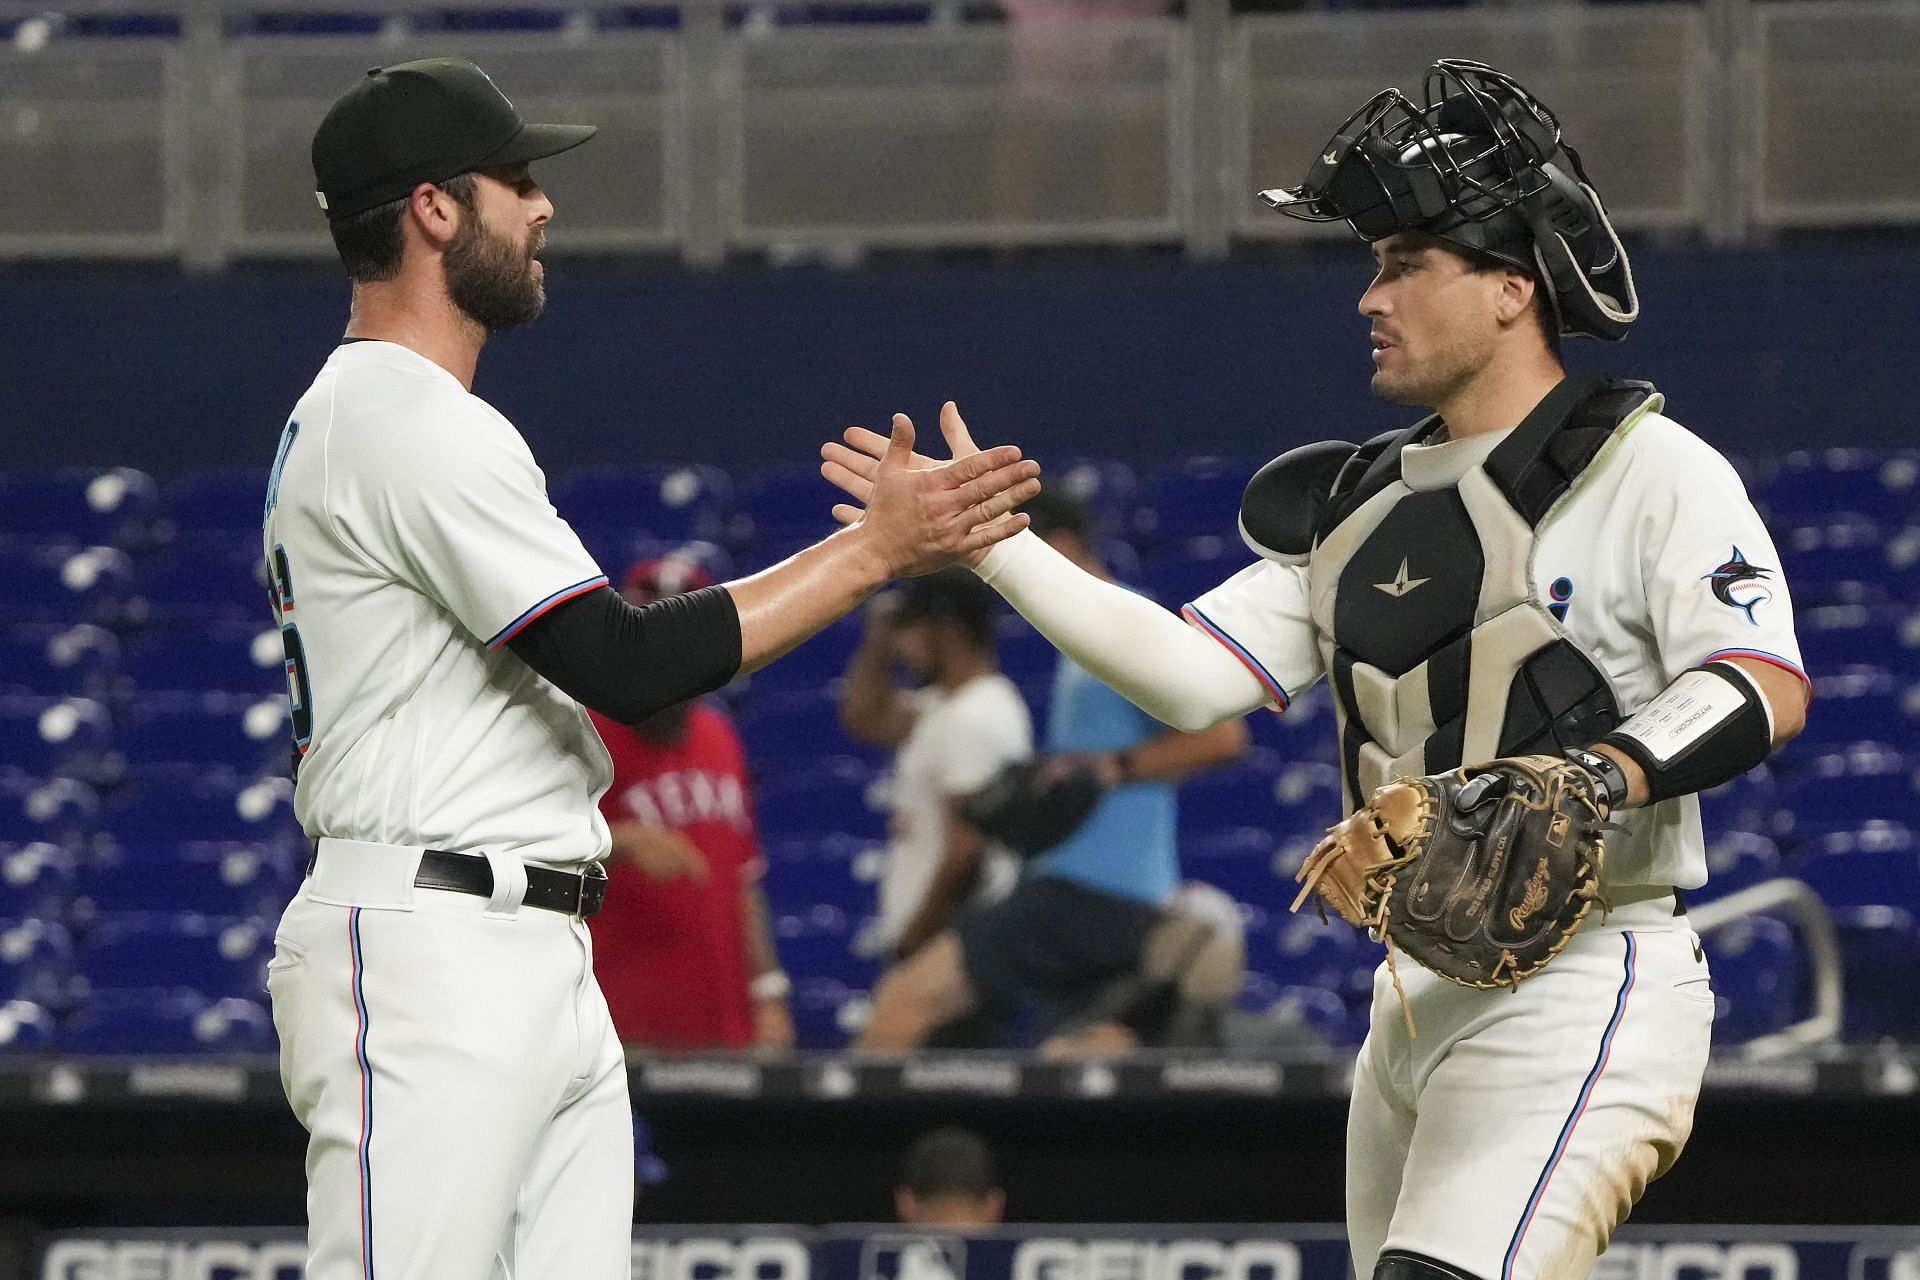 Marlins vs. Phillies prediction, betting odds for MLB on Tuesday 